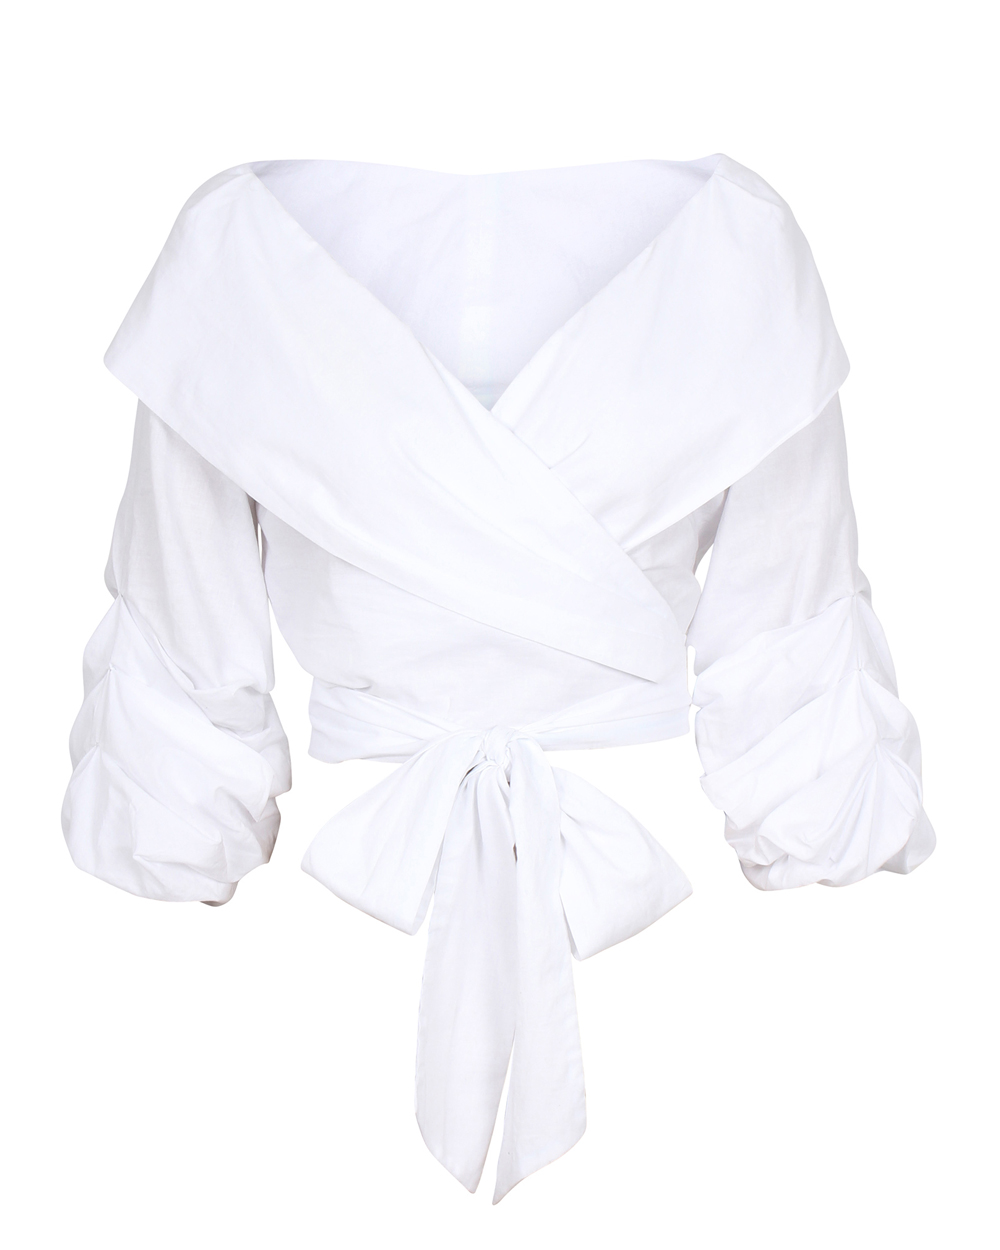 Wrap blouse, $189 from RUBY